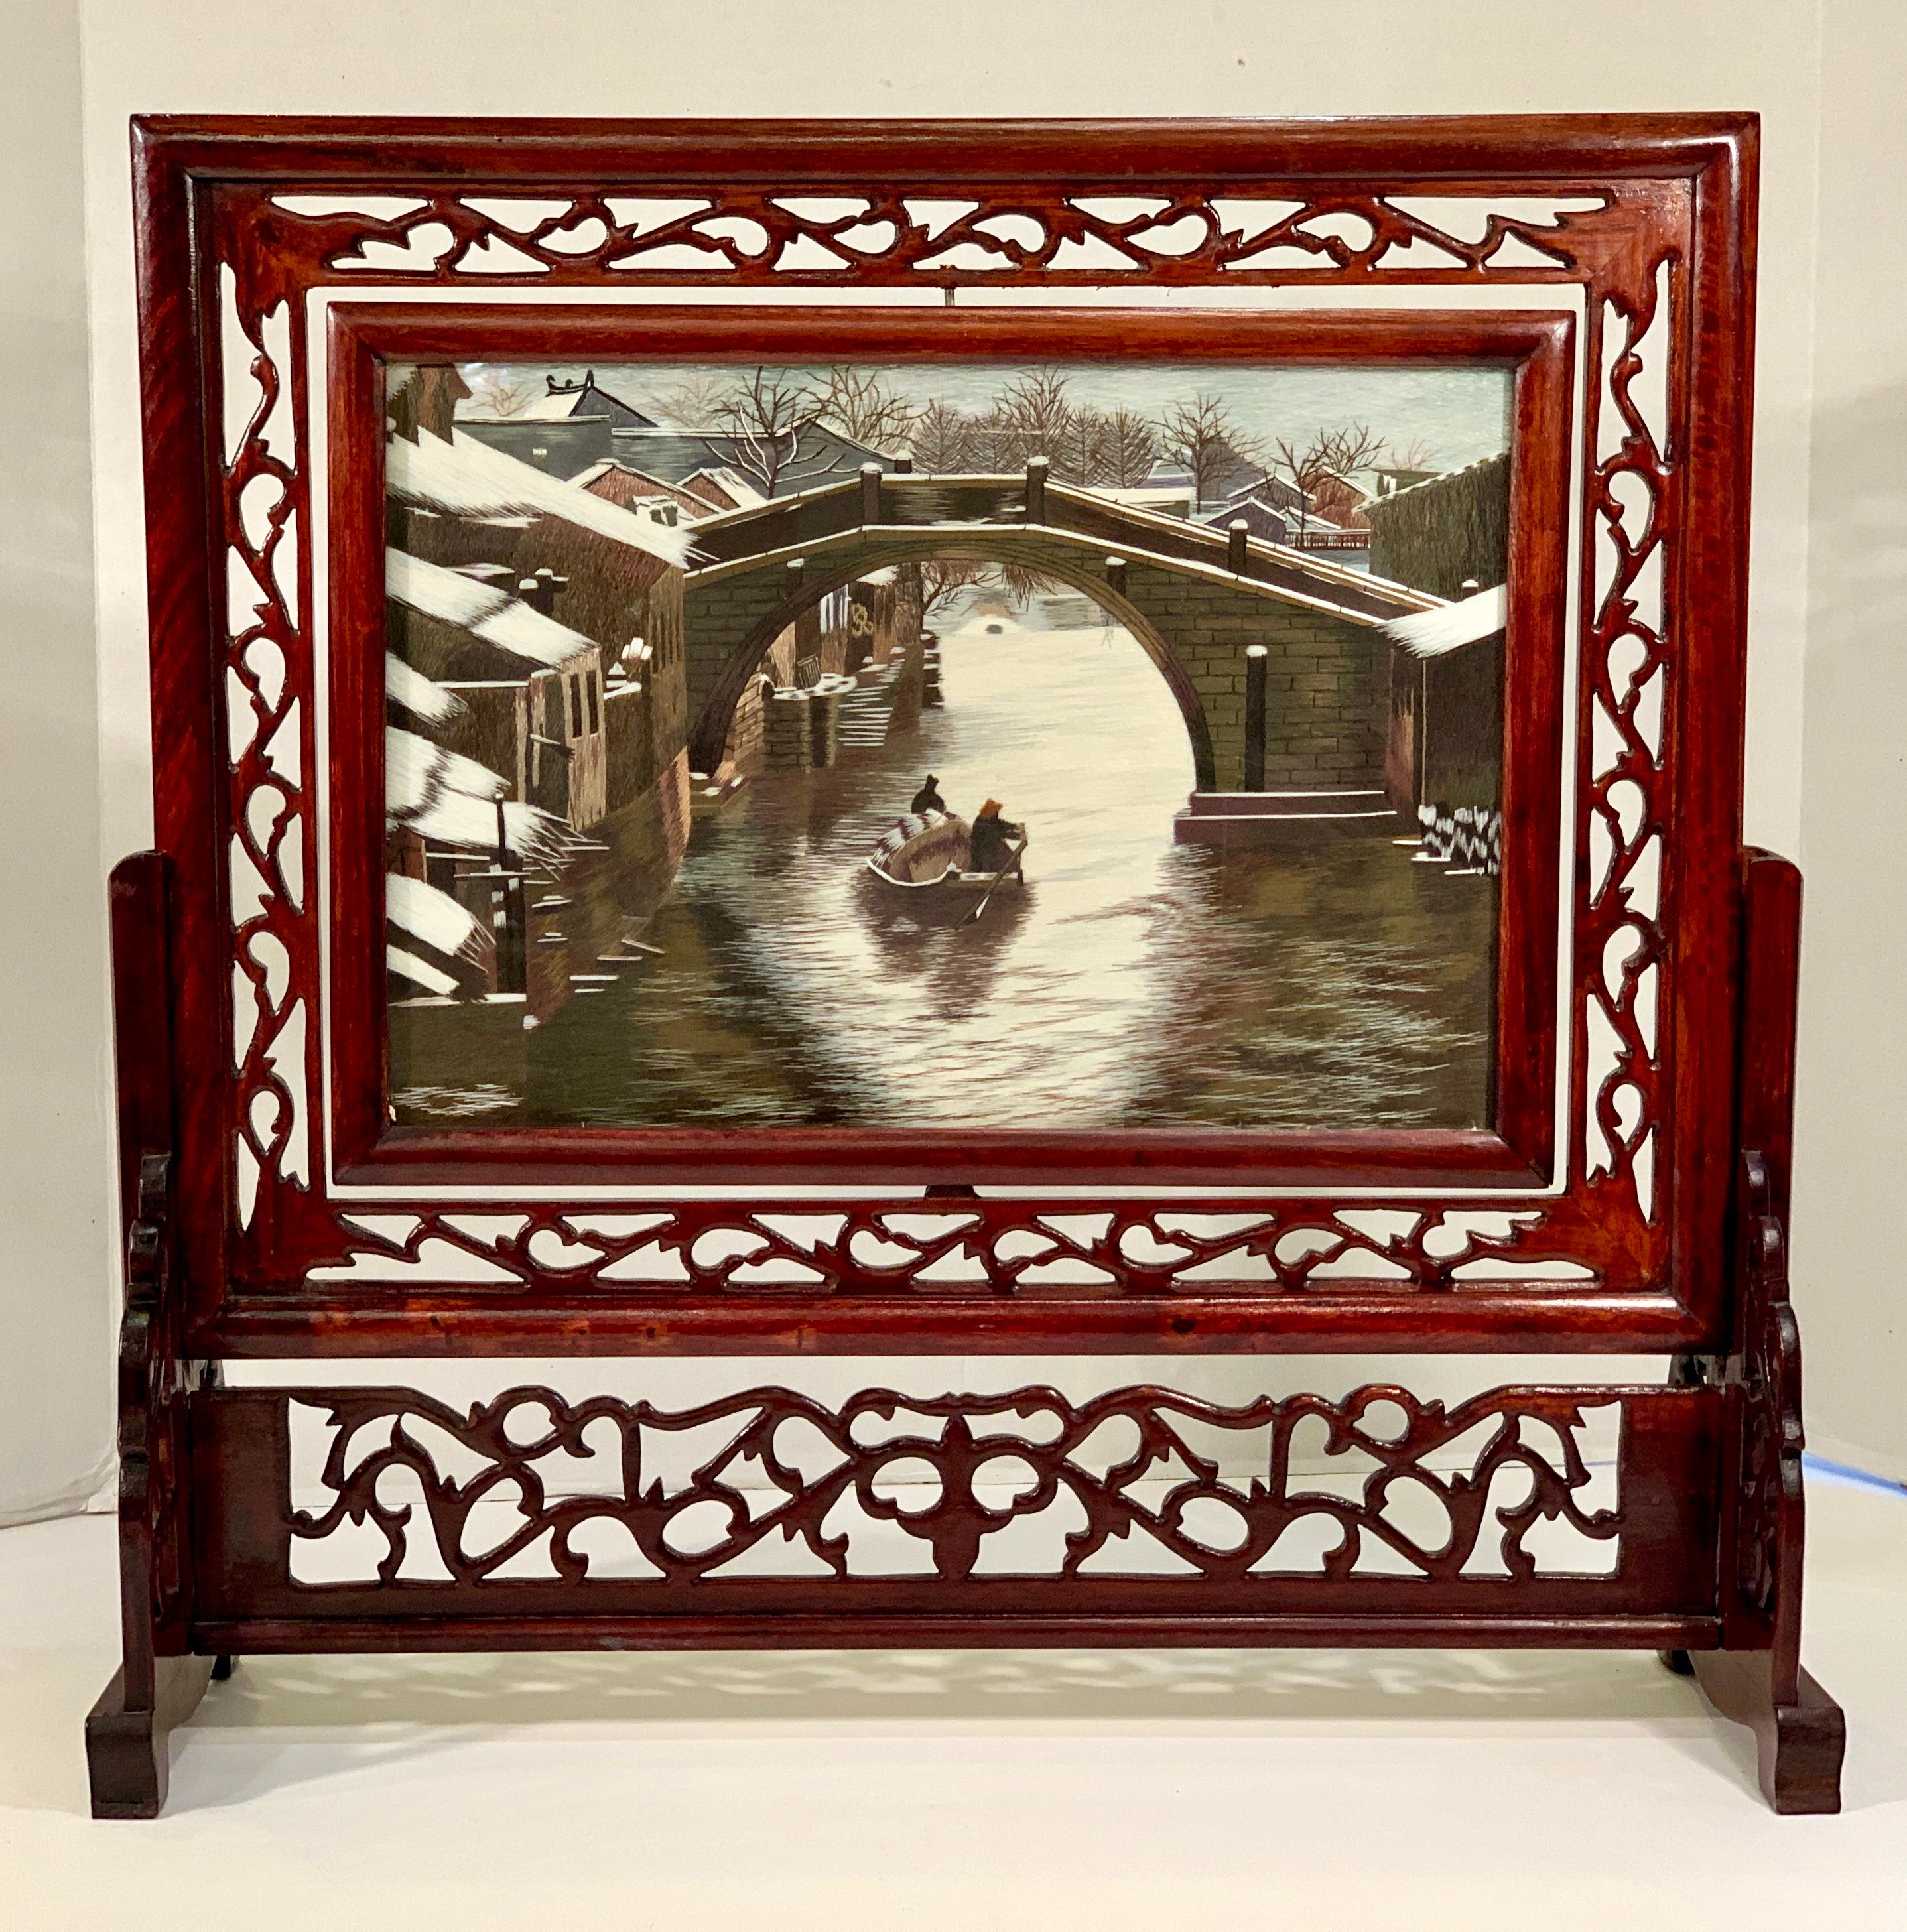 Details about   New Crane Chinese Hand Embroidery Art spin wood frame 2 sides double sided 